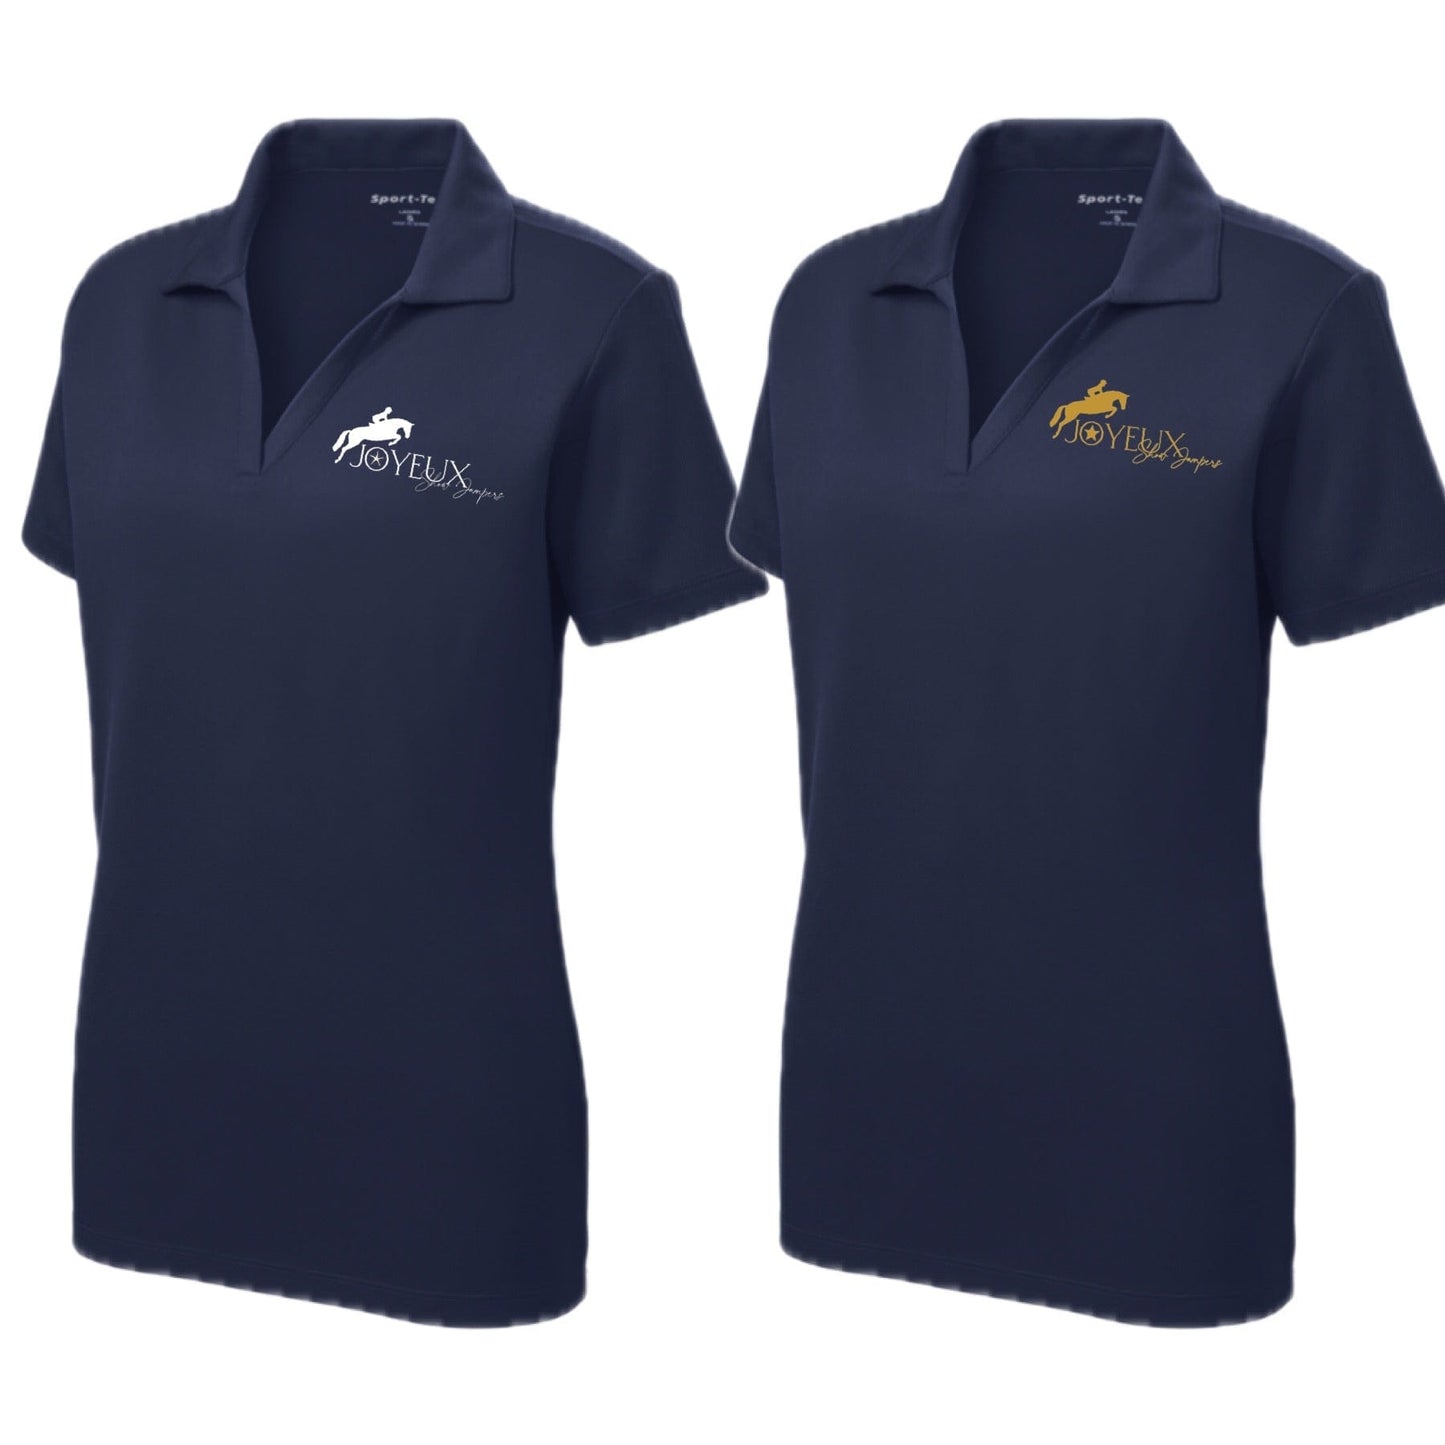 Equestrian Team Apparel Joyeux Show Stables Men's Polo equestrian team apparel online tack store mobile tack store custom farm apparel custom show stable clothing equestrian lifestyle horse show clothing riding clothes horses equestrian tack store